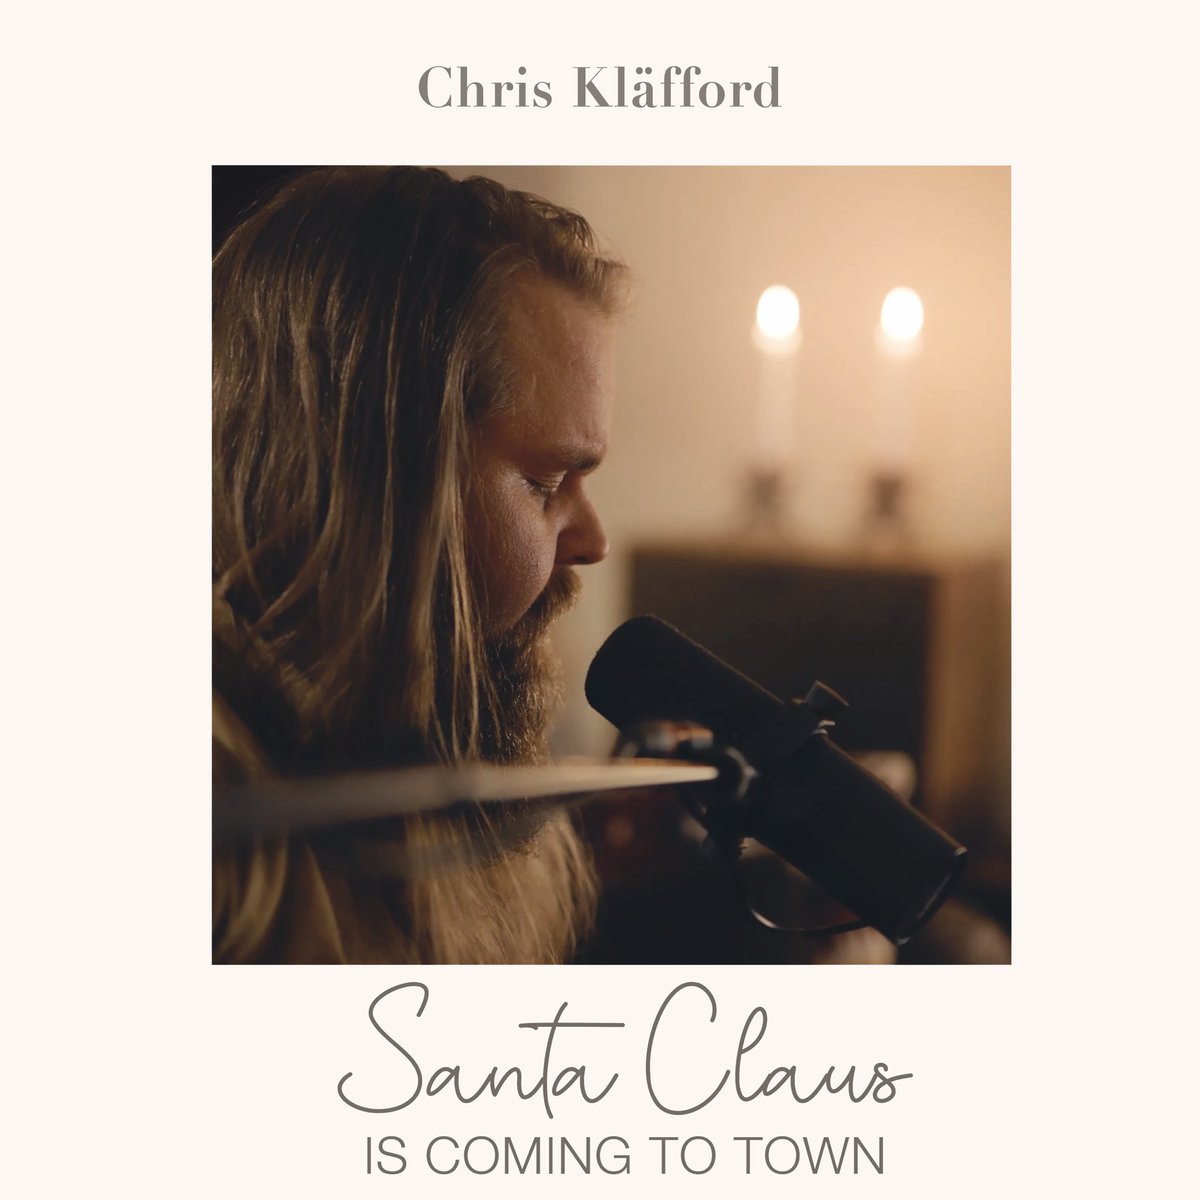 My version of Santa Claus is coming to town is out now!! 🥳🎅🏻🎸🎄 Christmas is my absolute favorite holiday, and I hope you get some holiday spirit listening to this song! 🔔❤️ Listen here: chrisklafford.lnk.to/SantaClausIsCo…